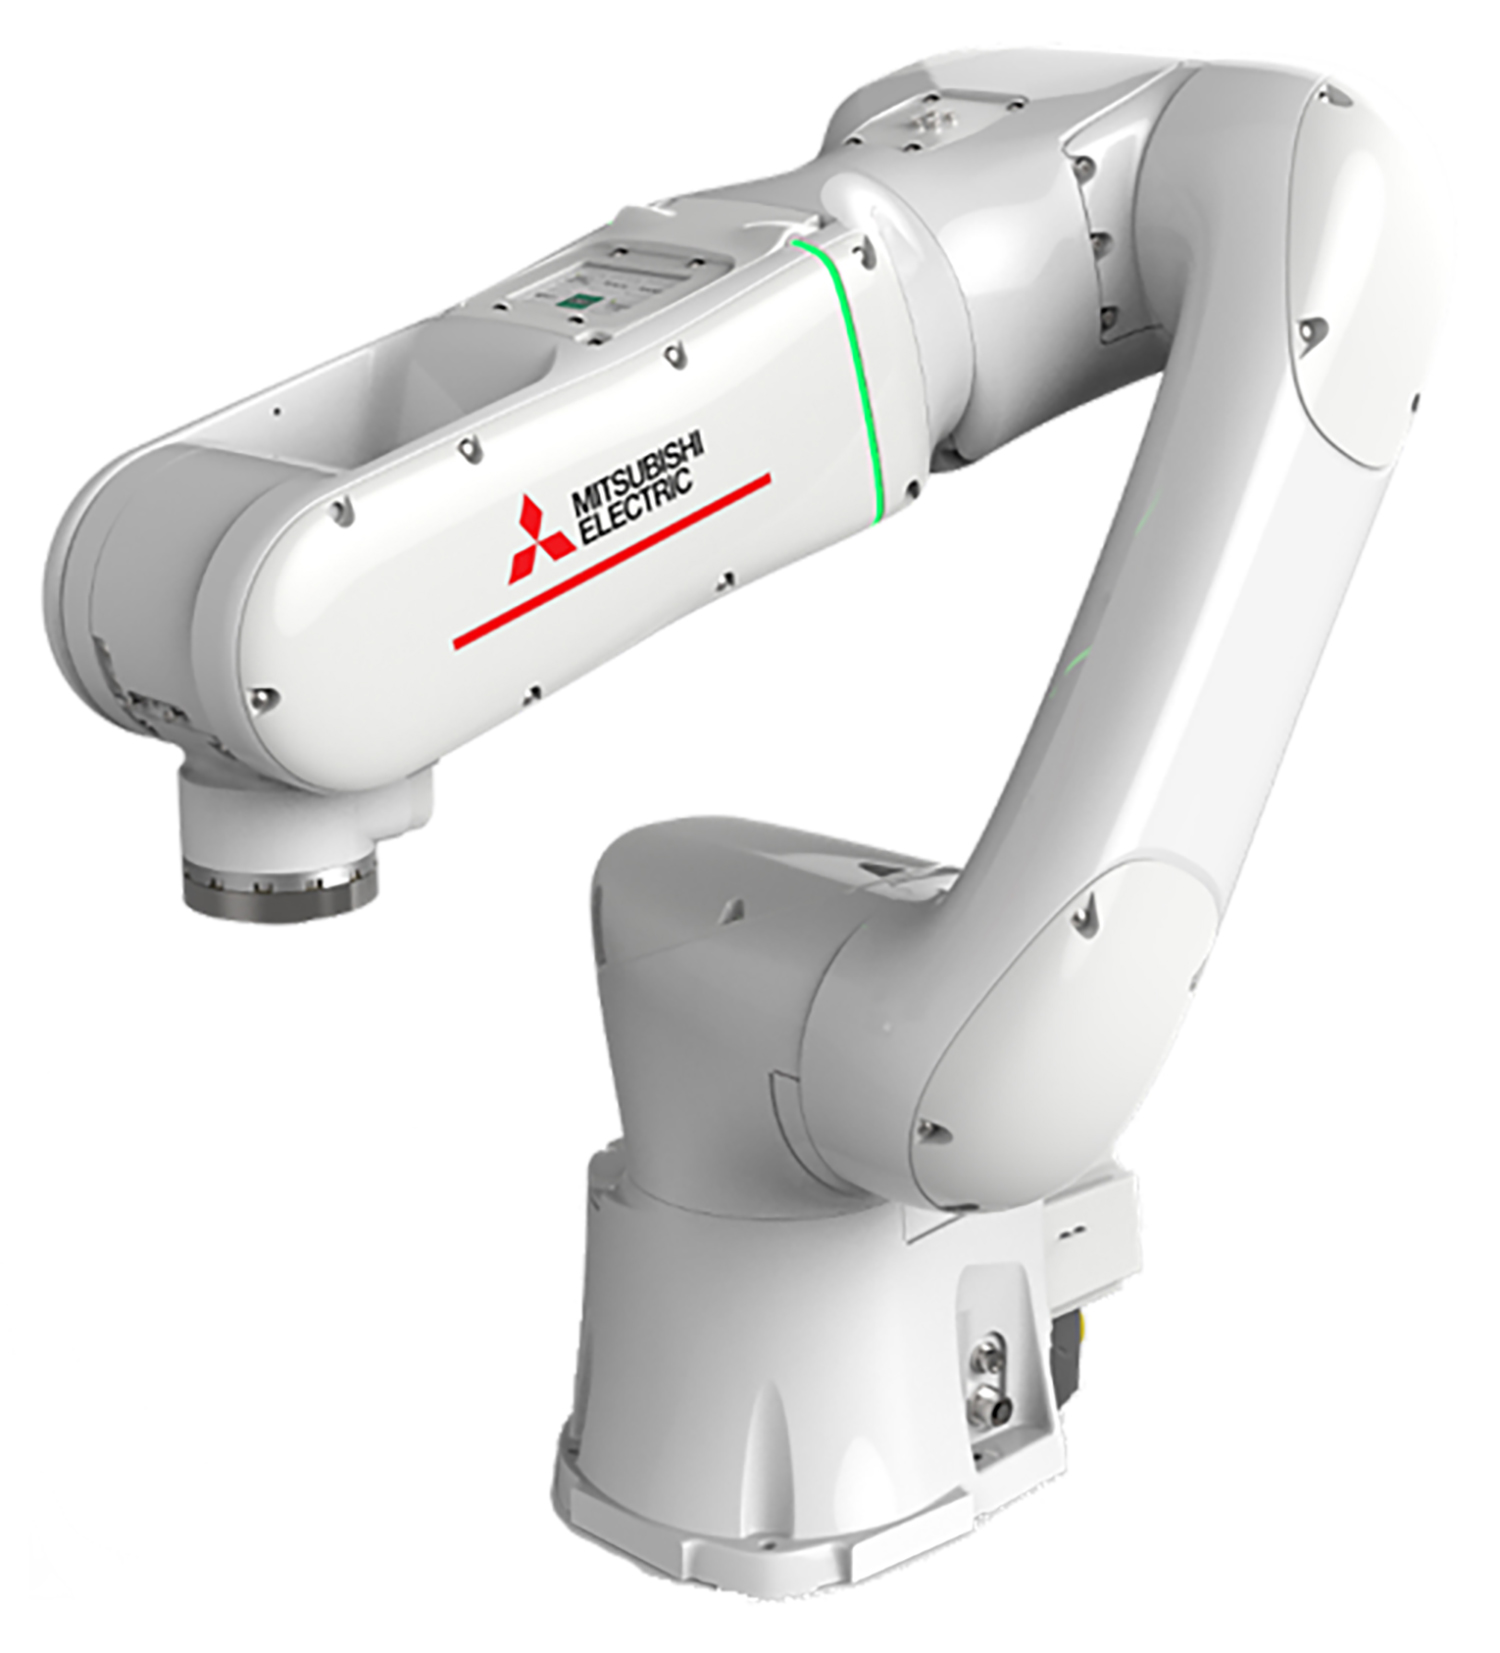 Mitsubishi Electric’s MELFA Assista supports metalworking applications where operators and robots work in close proximity without physical barriers. [Source: Mitsubishi Electric Europe B.V.]